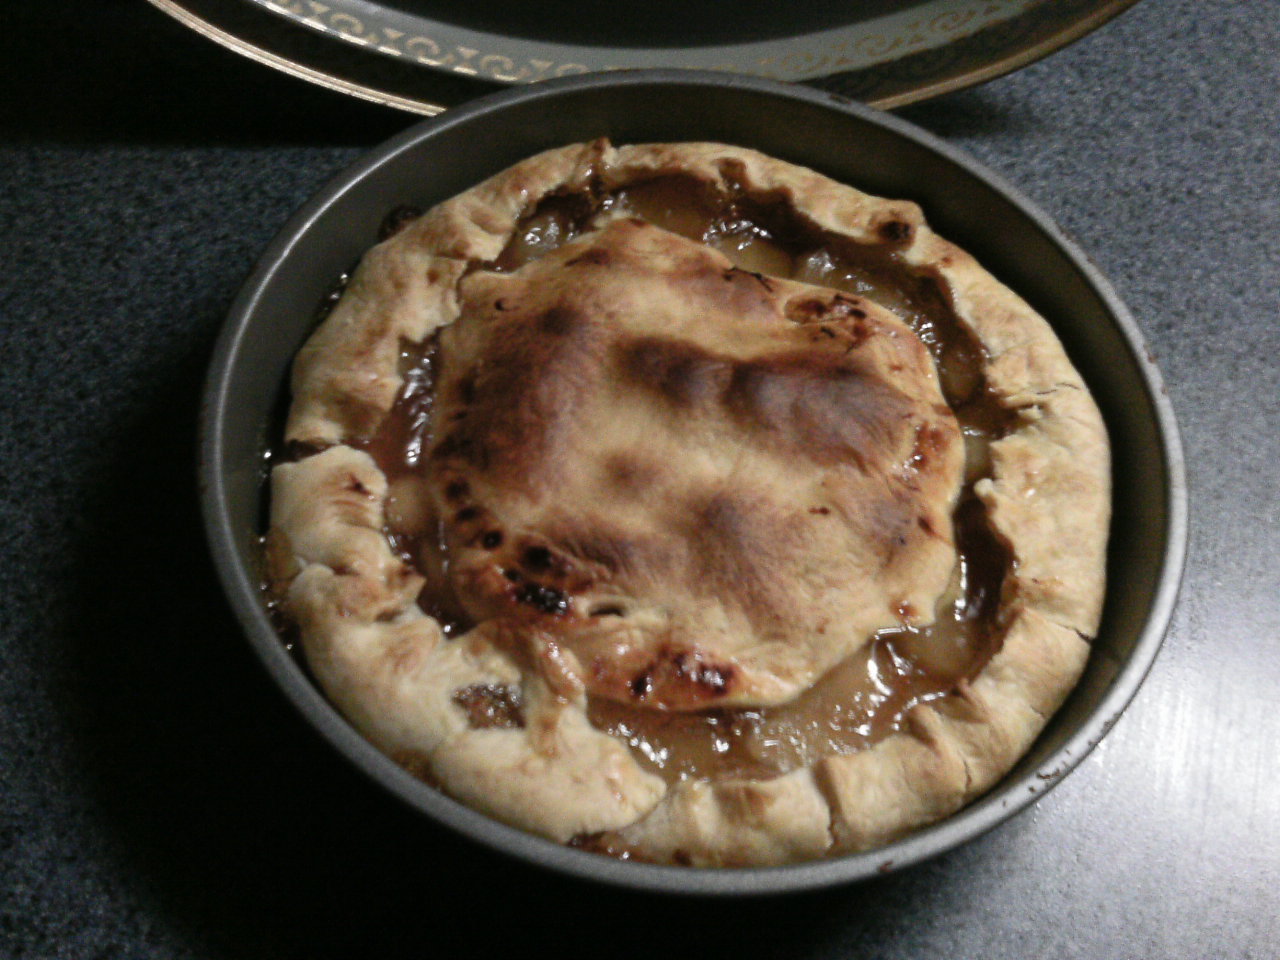 Two-fer-one: The Apple-Rine Pie